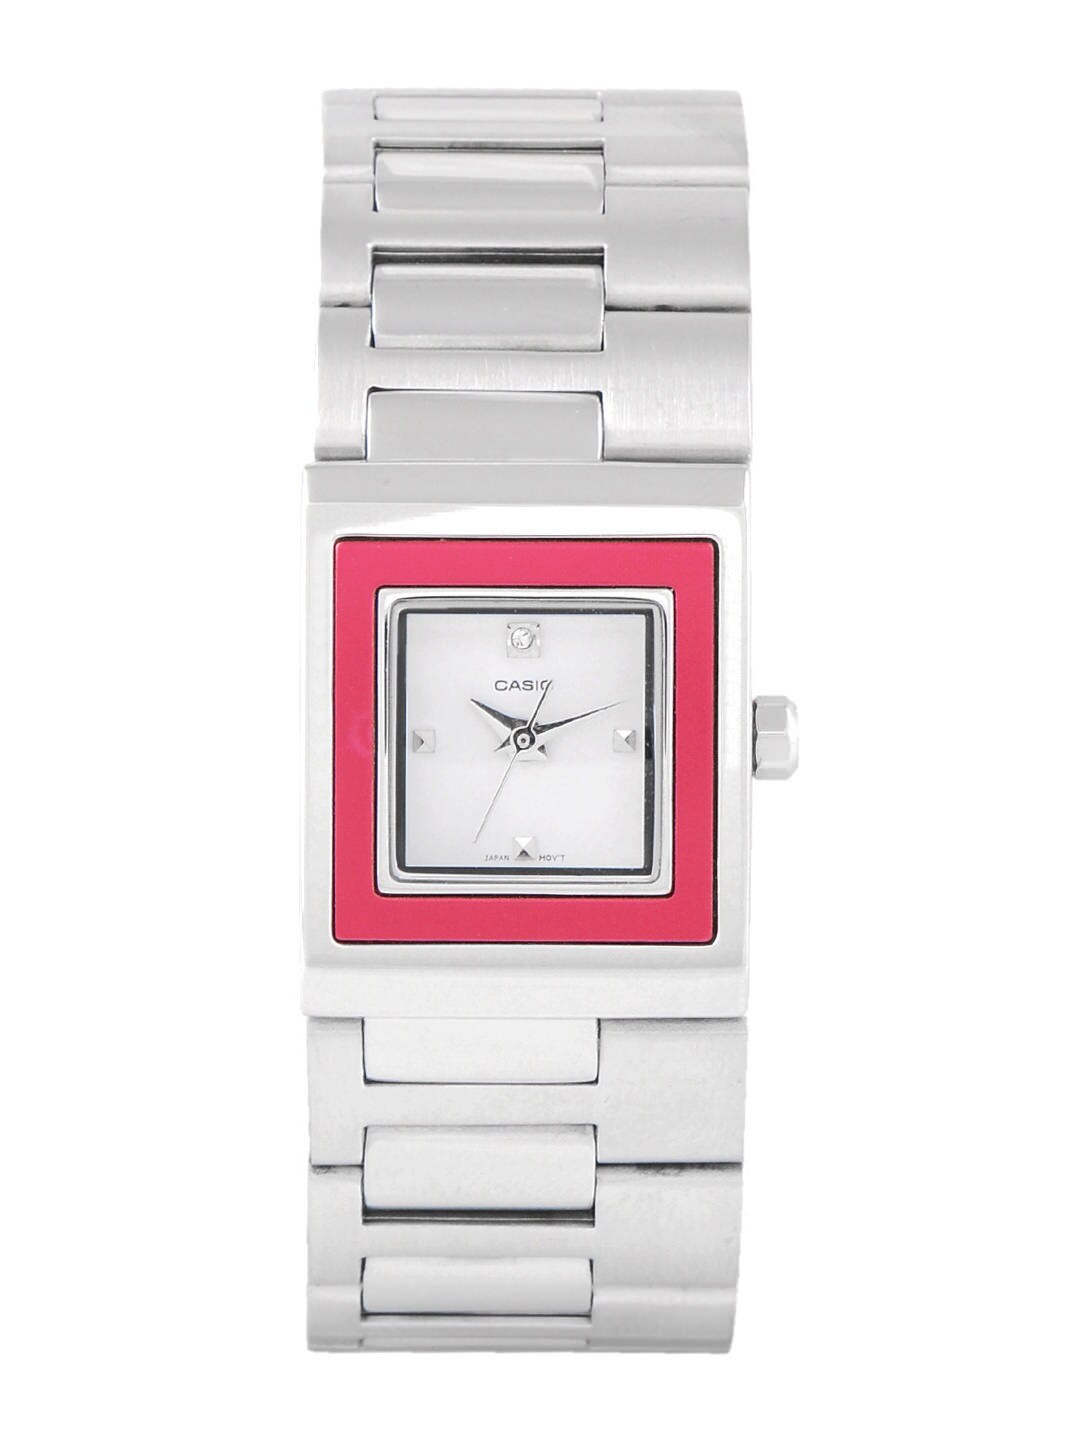 CASIO ENTICER Women White Dial Analogue Watch A666